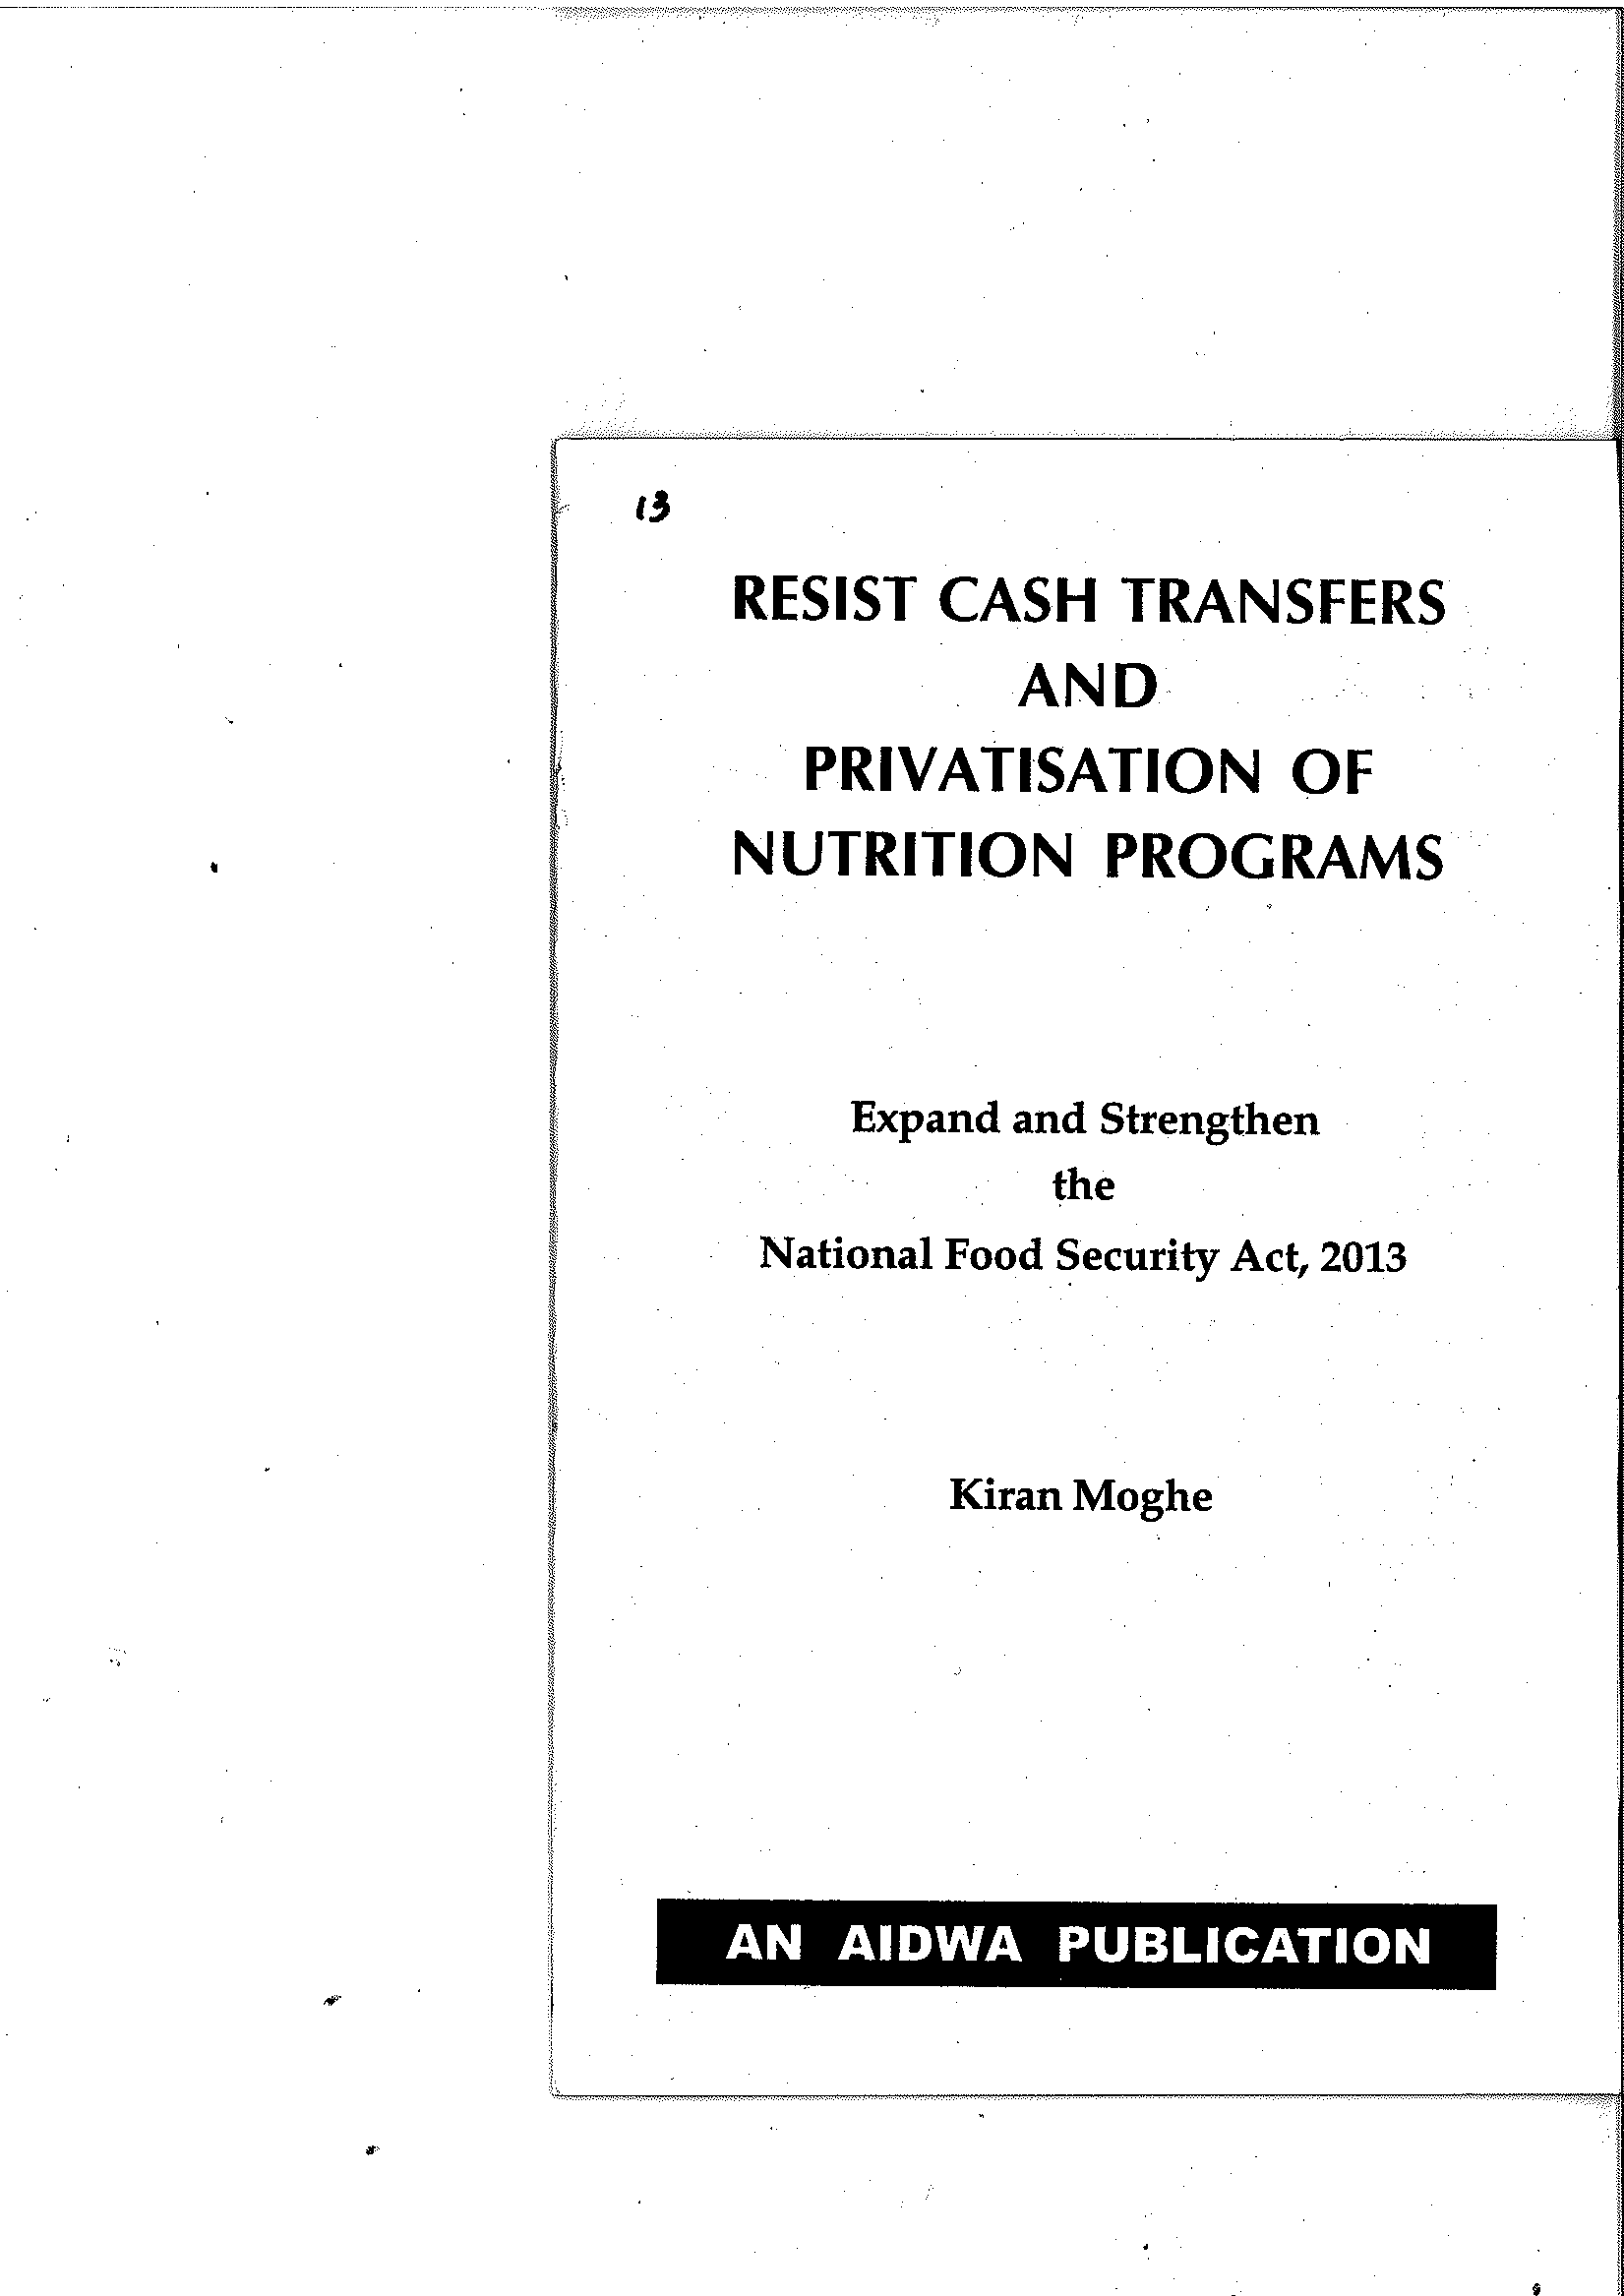 Resist Cash Transfers and Privitisation of Nutrition Programs 